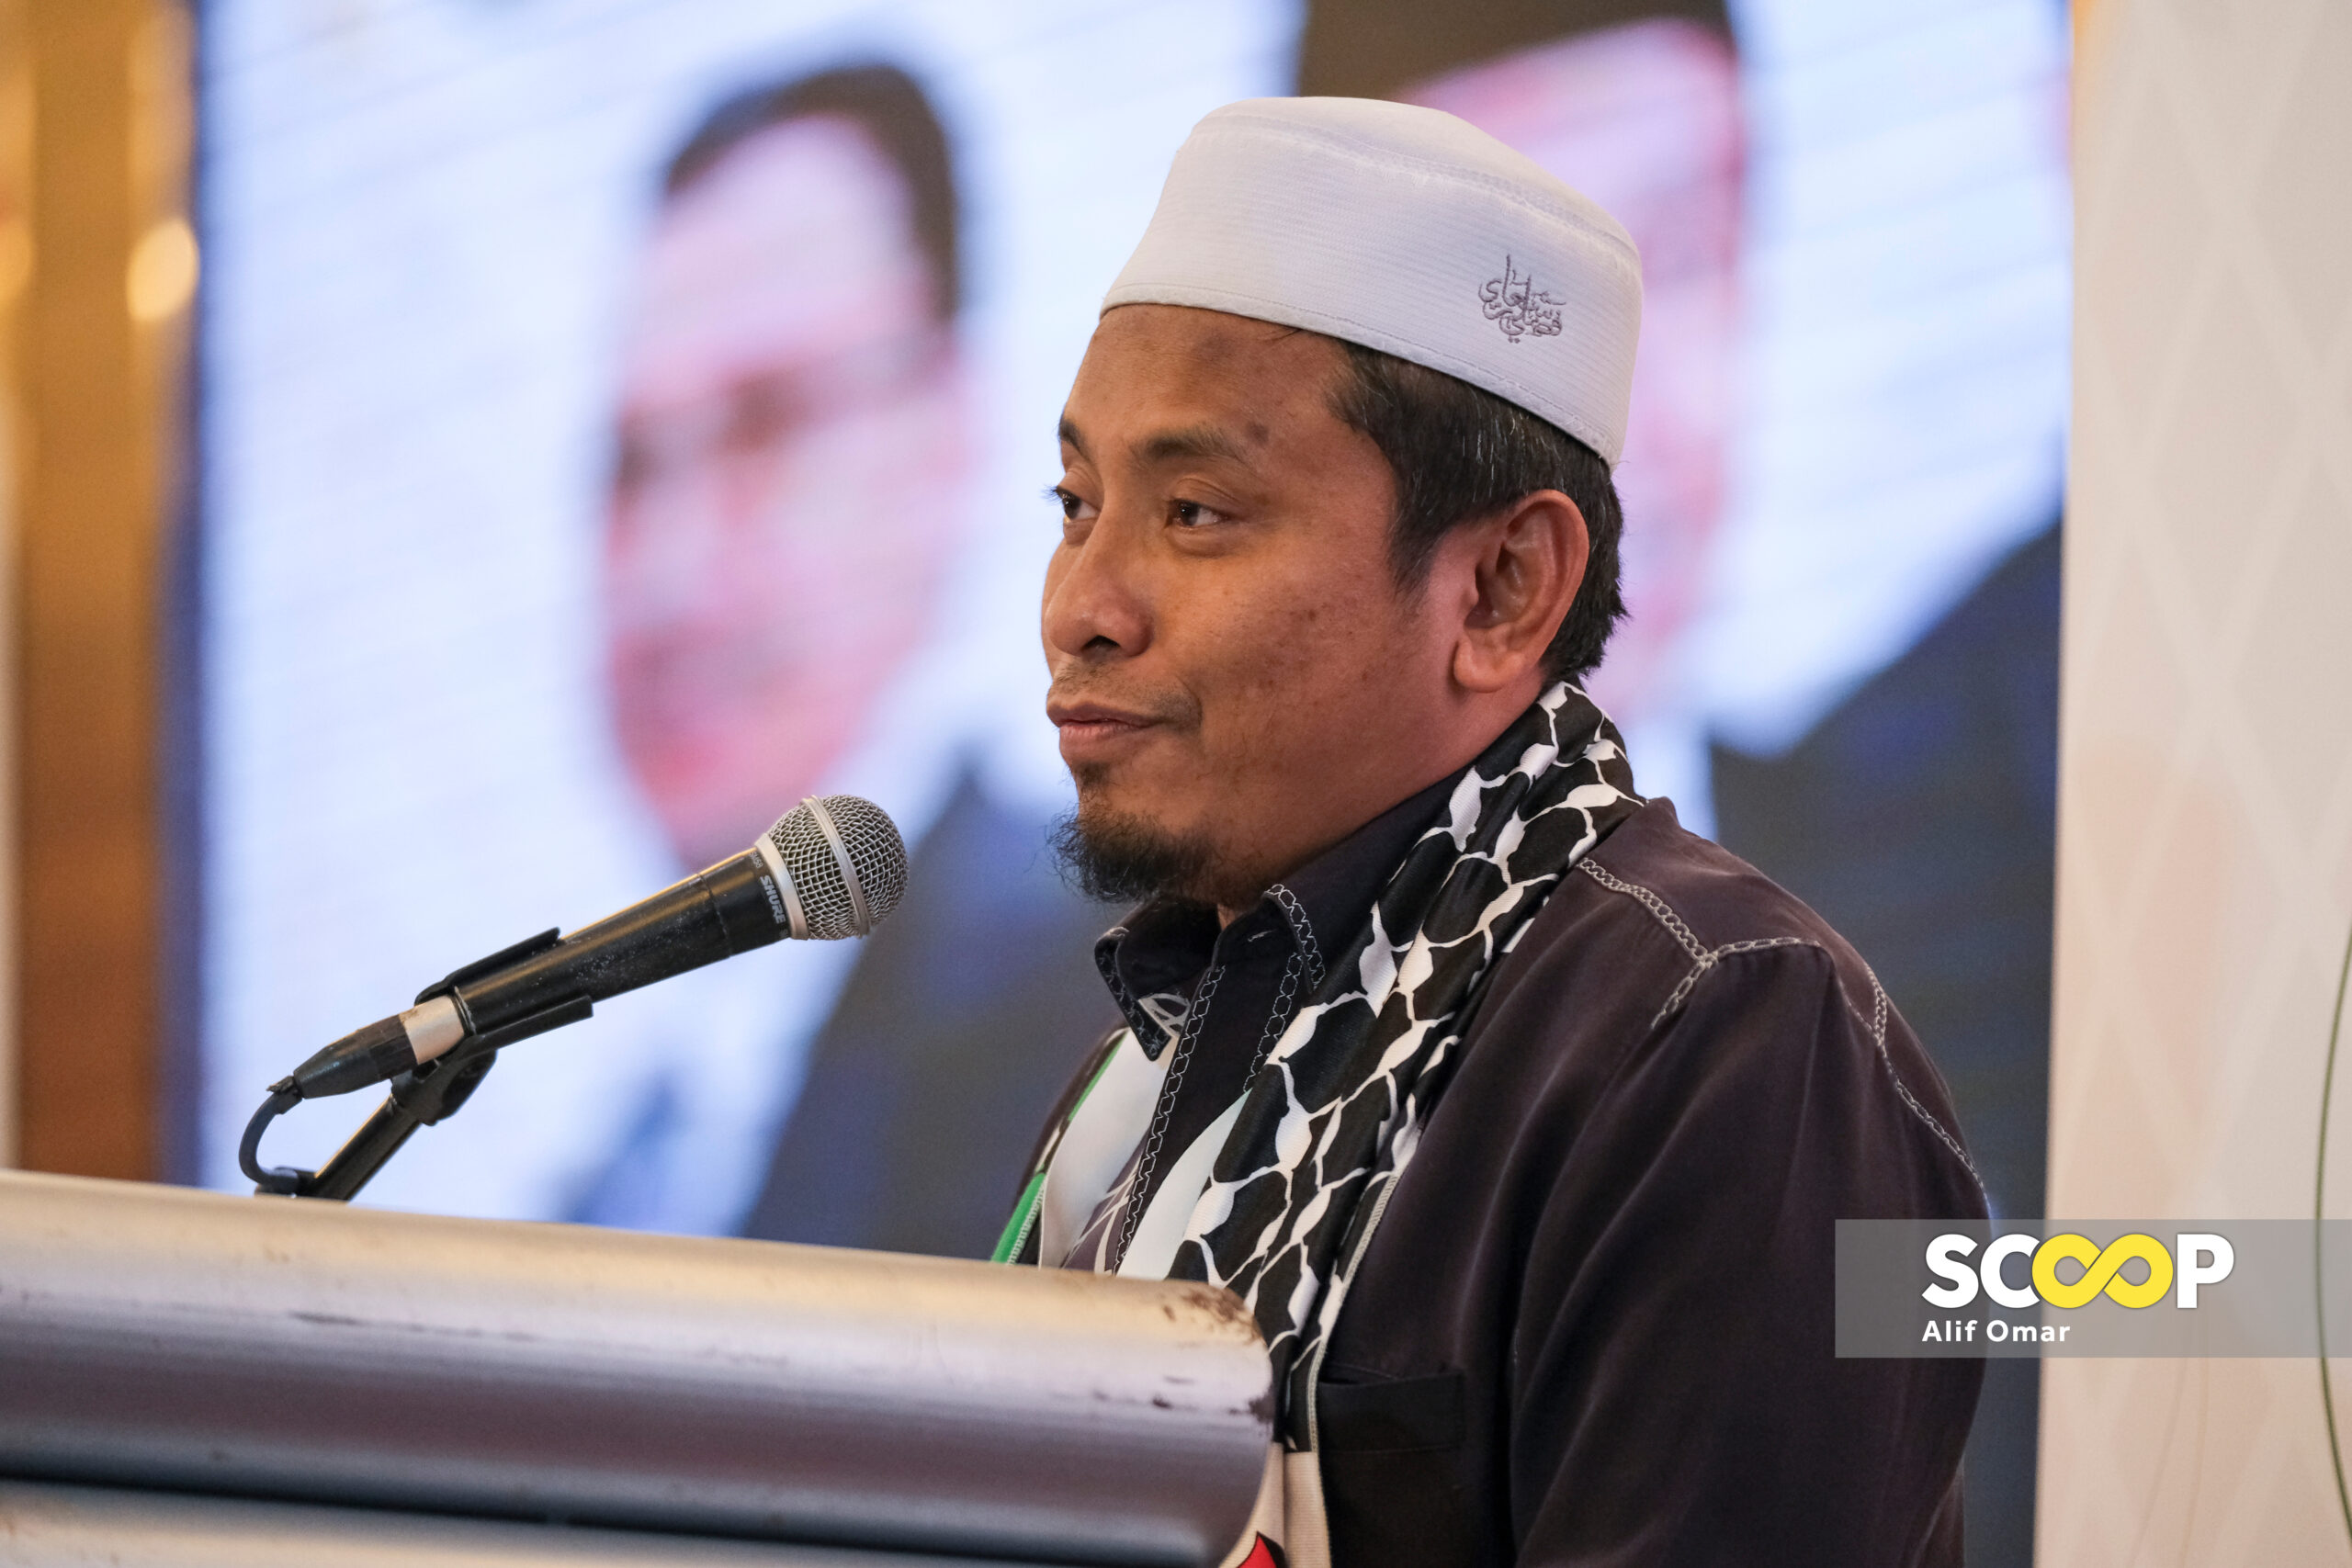 Premature to discuss Perlis MB replacement amid graft allegations: PAS info chief